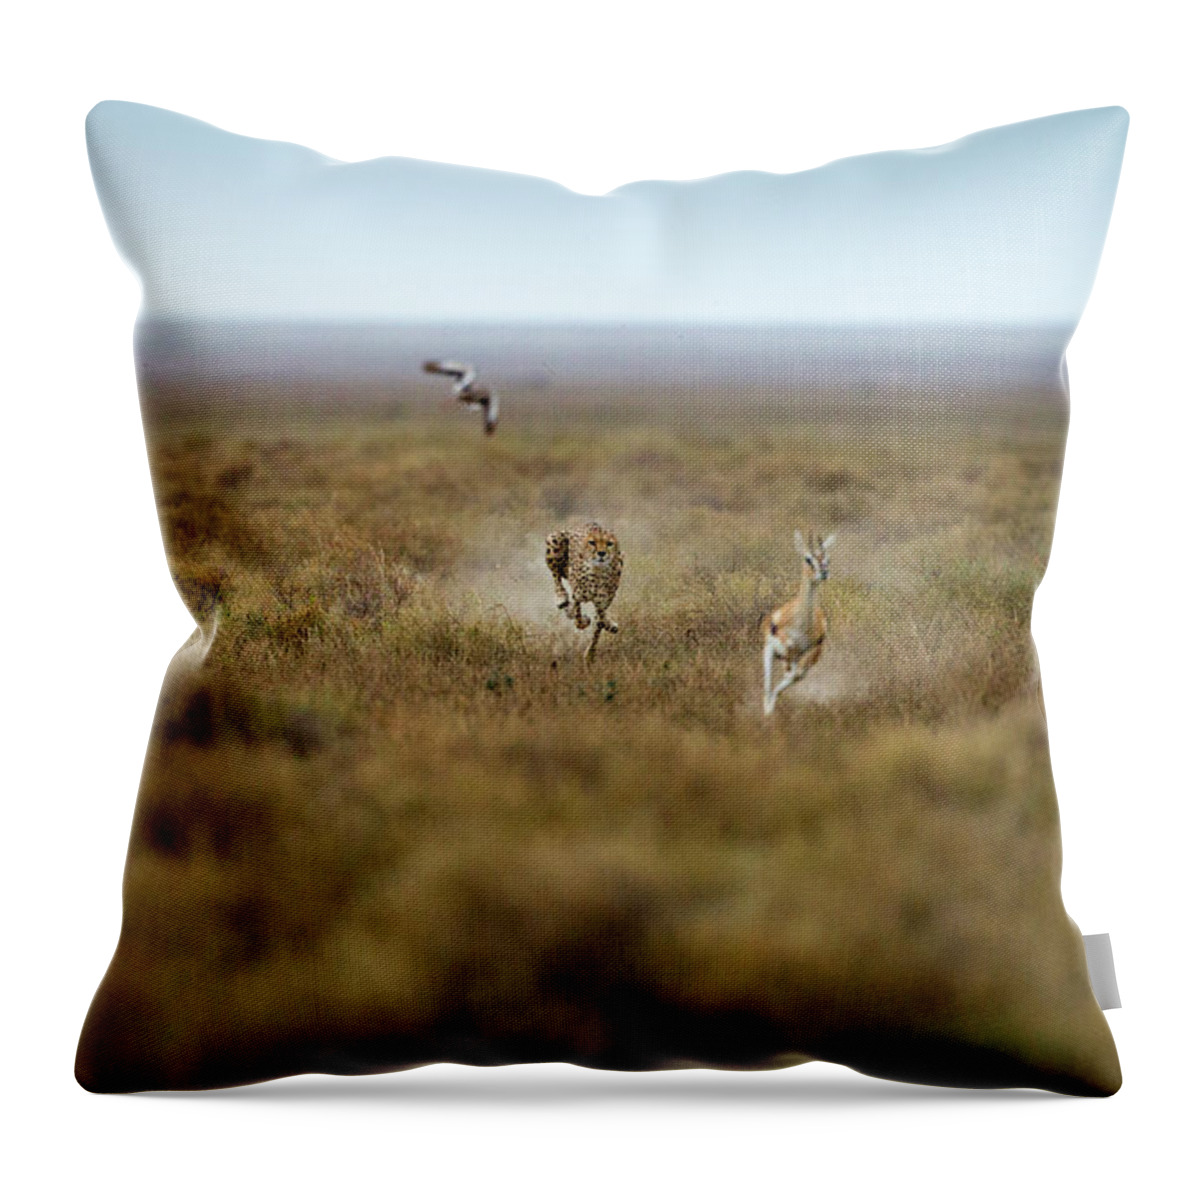 Grass Throw Pillow featuring the photograph Cheetah Chases Gazelle, Ngorongoro by Paul Souders